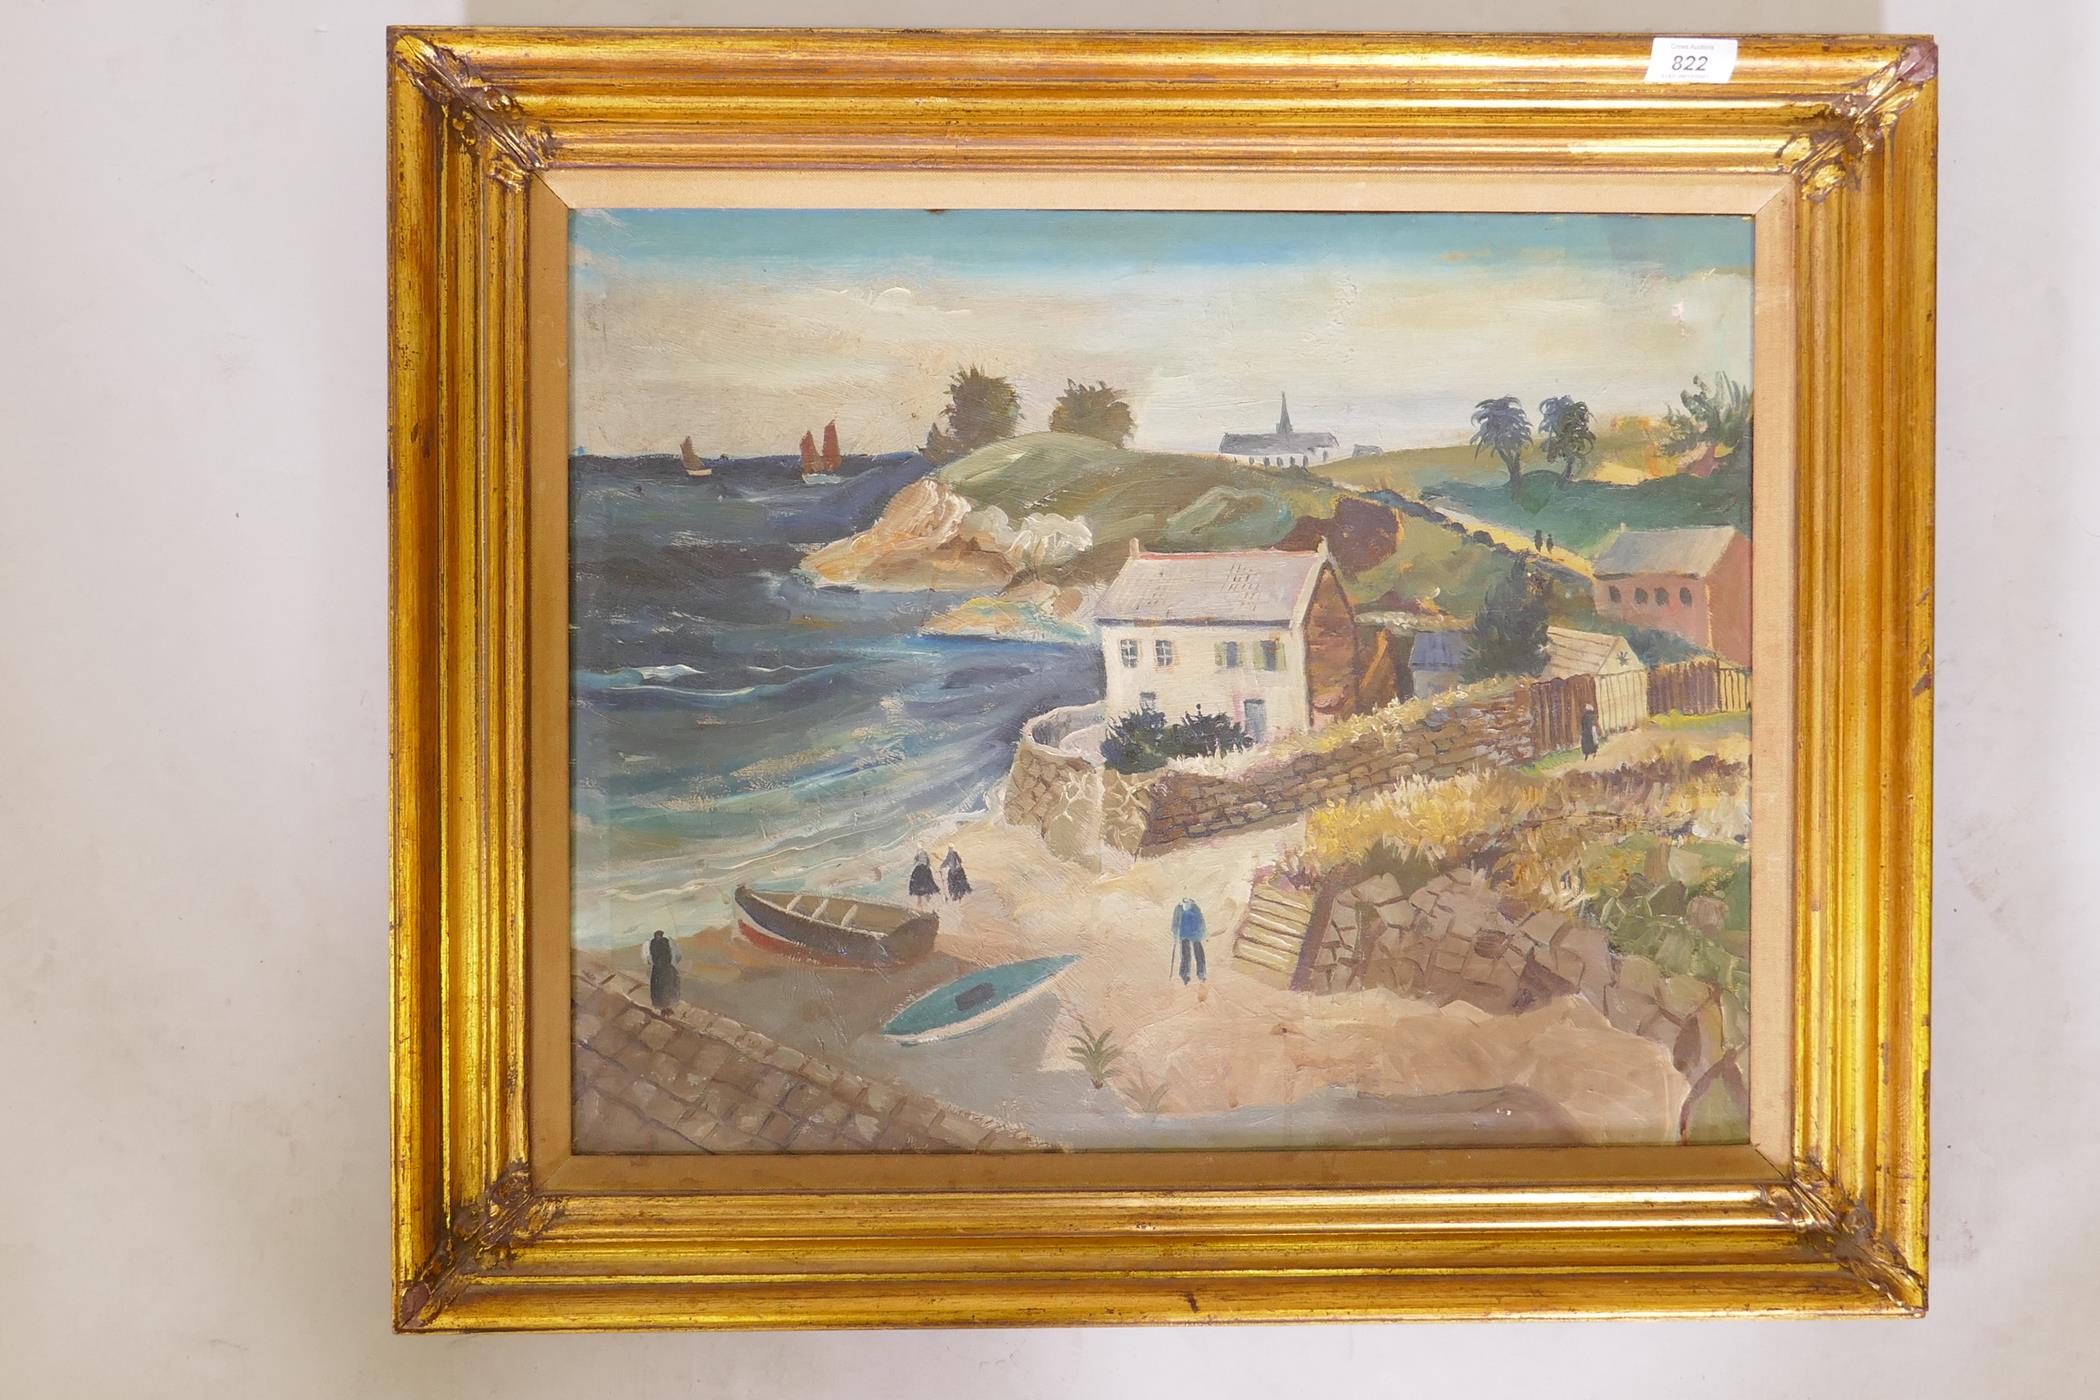 Naive landscape with coastal bay, unsigned, early C20th, oil on canvas, 22" x 17" - Image 2 of 3